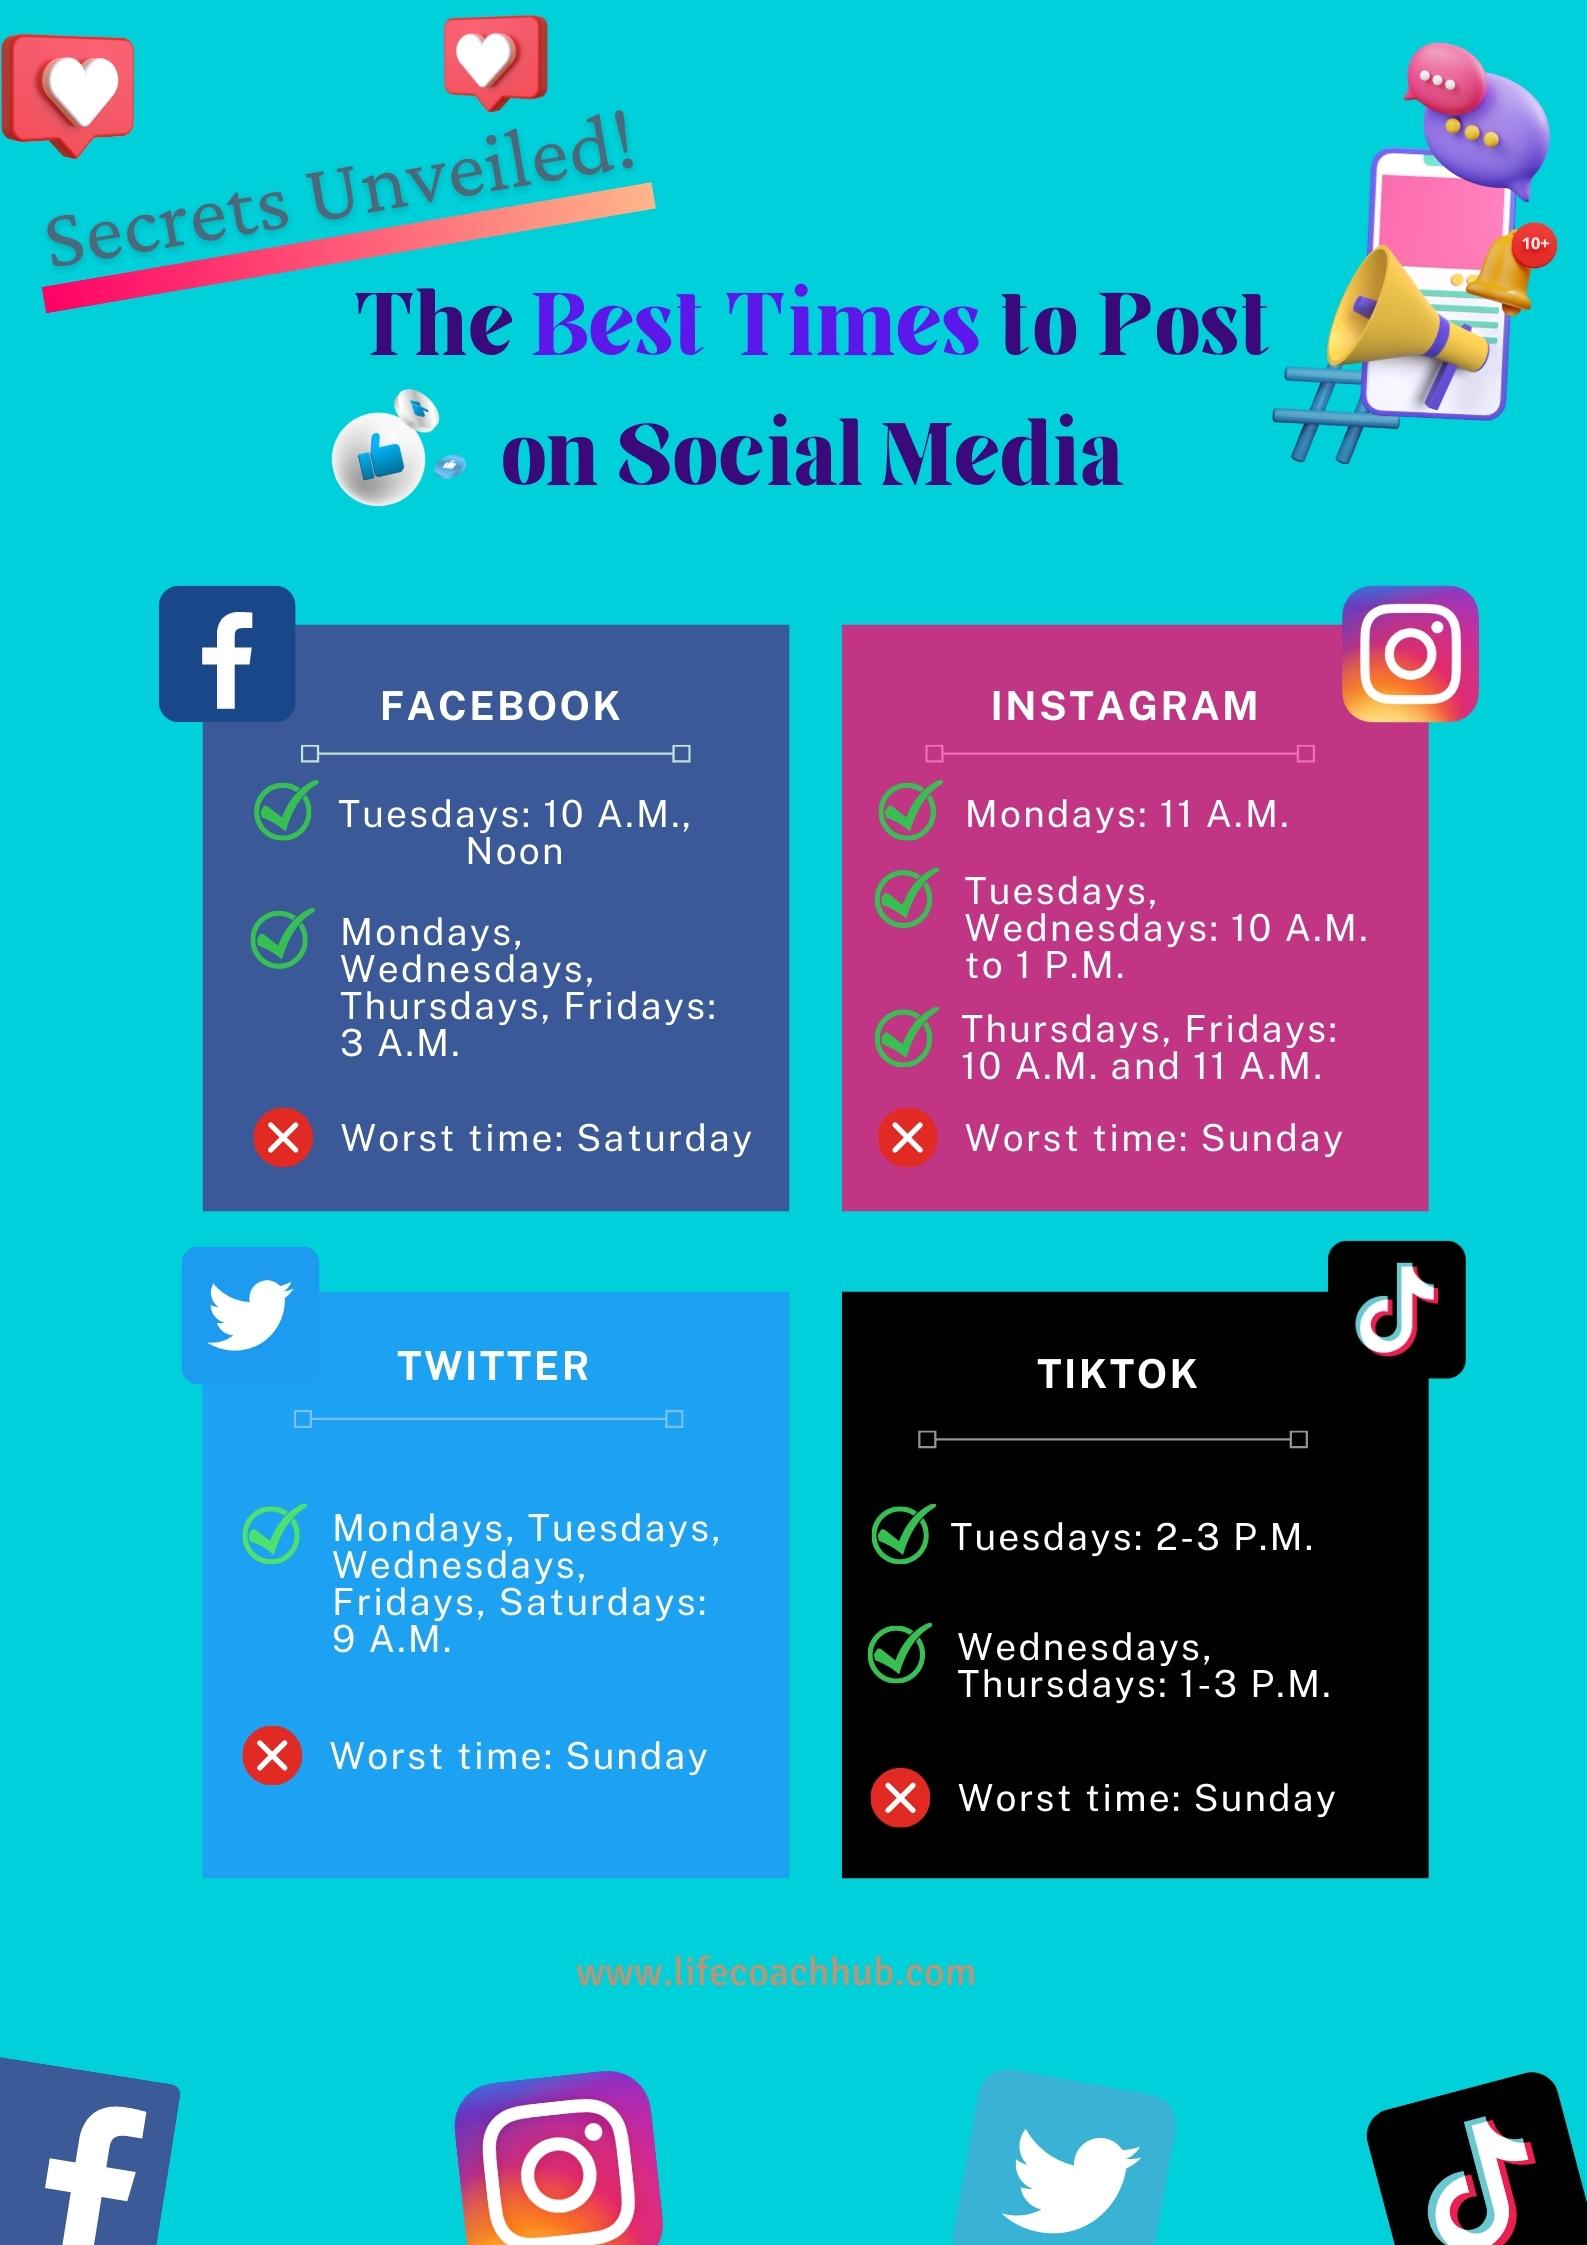 Best times to post on social media